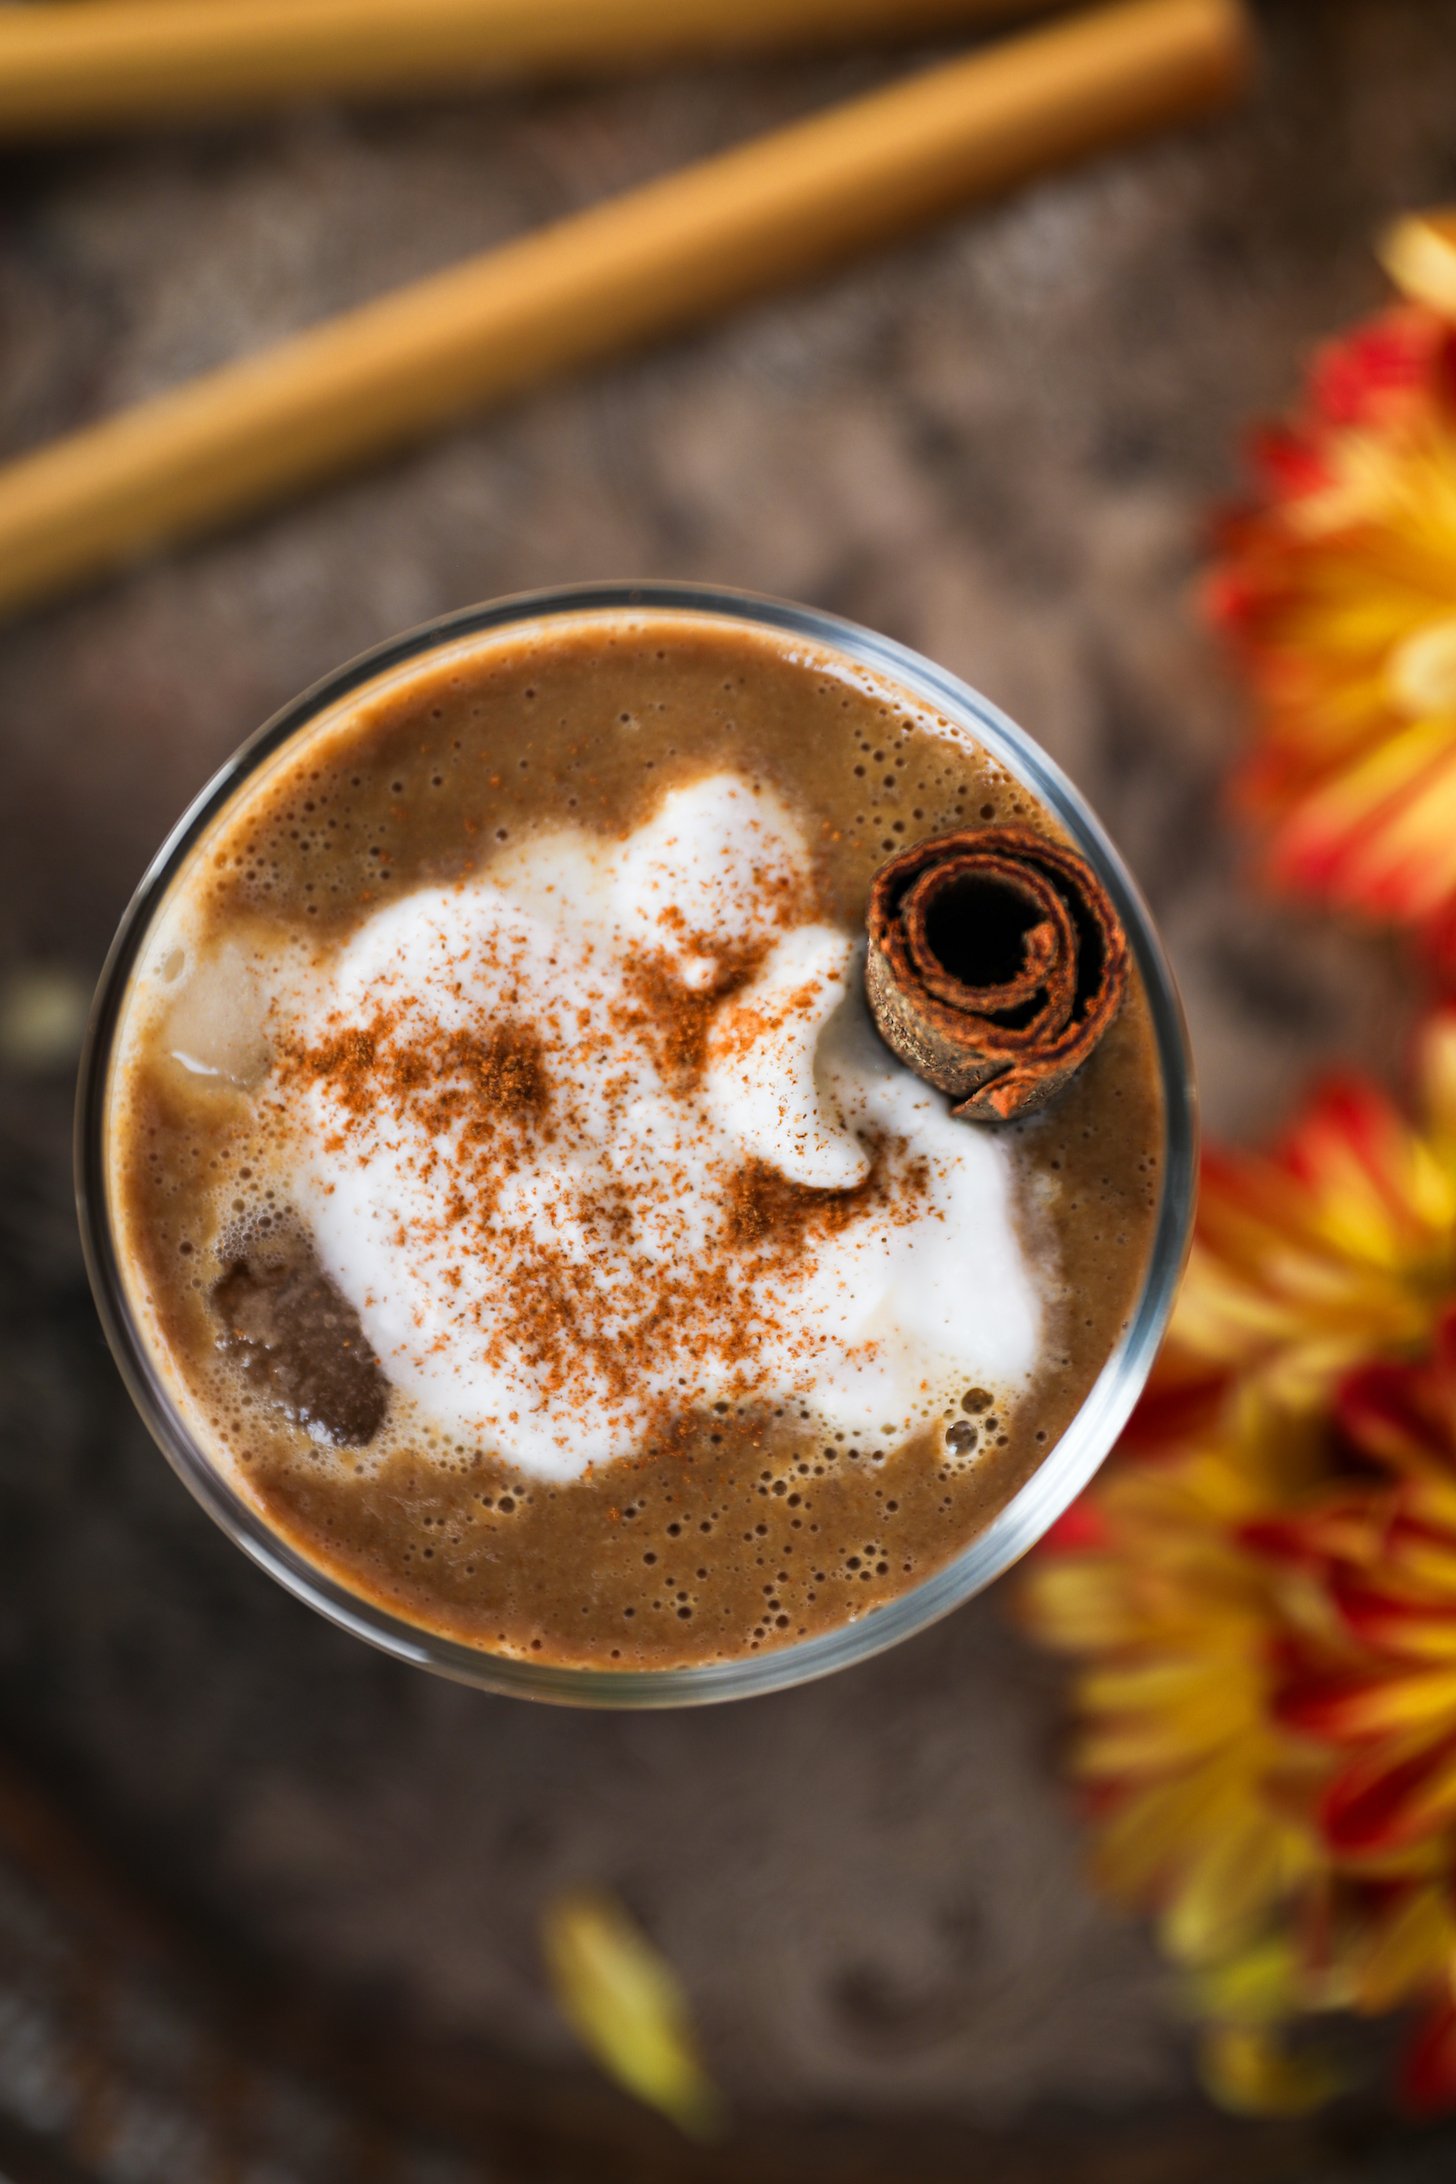 Top-down view of a latte in a glass, with cream on top, sprinkled with spice, and a cinnamon stick inside.